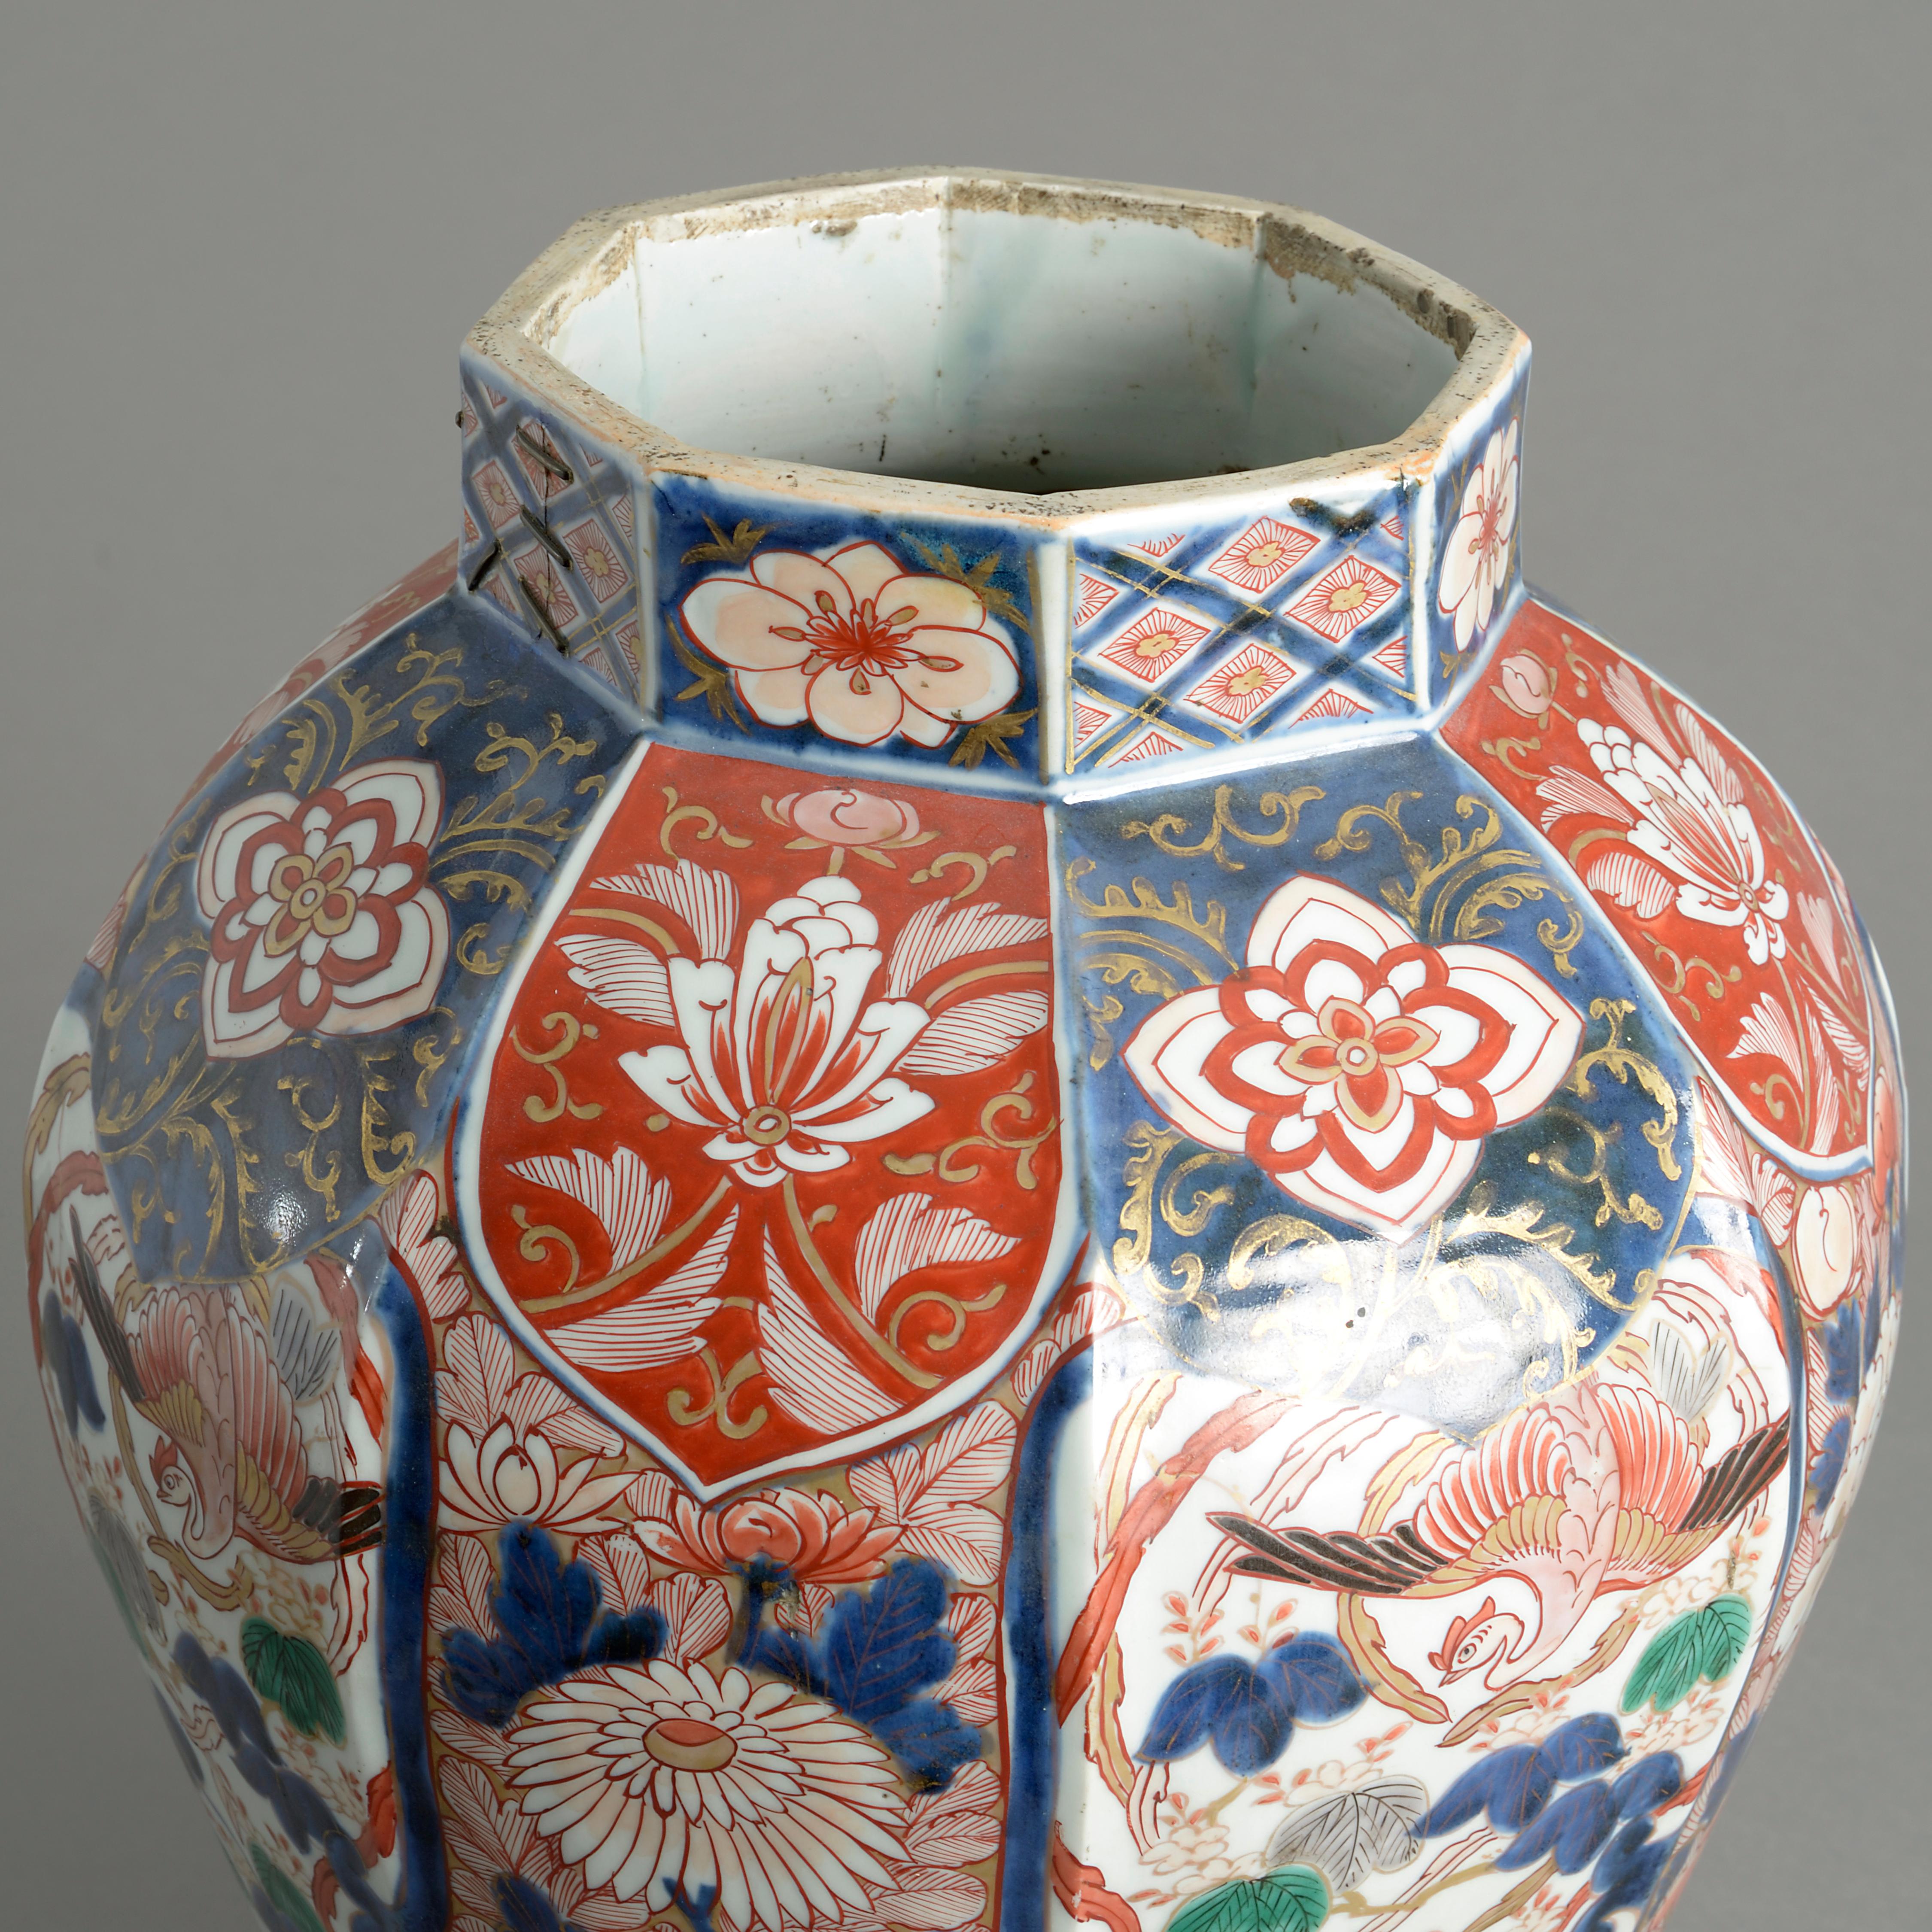 An early 18th century Imari porcelain vase, of faceted baluster form, decorated throughout with foliage, flowers and fantastical birds in the traditional manner with red, blue and green glazes upon a white ground with gilded highlights.